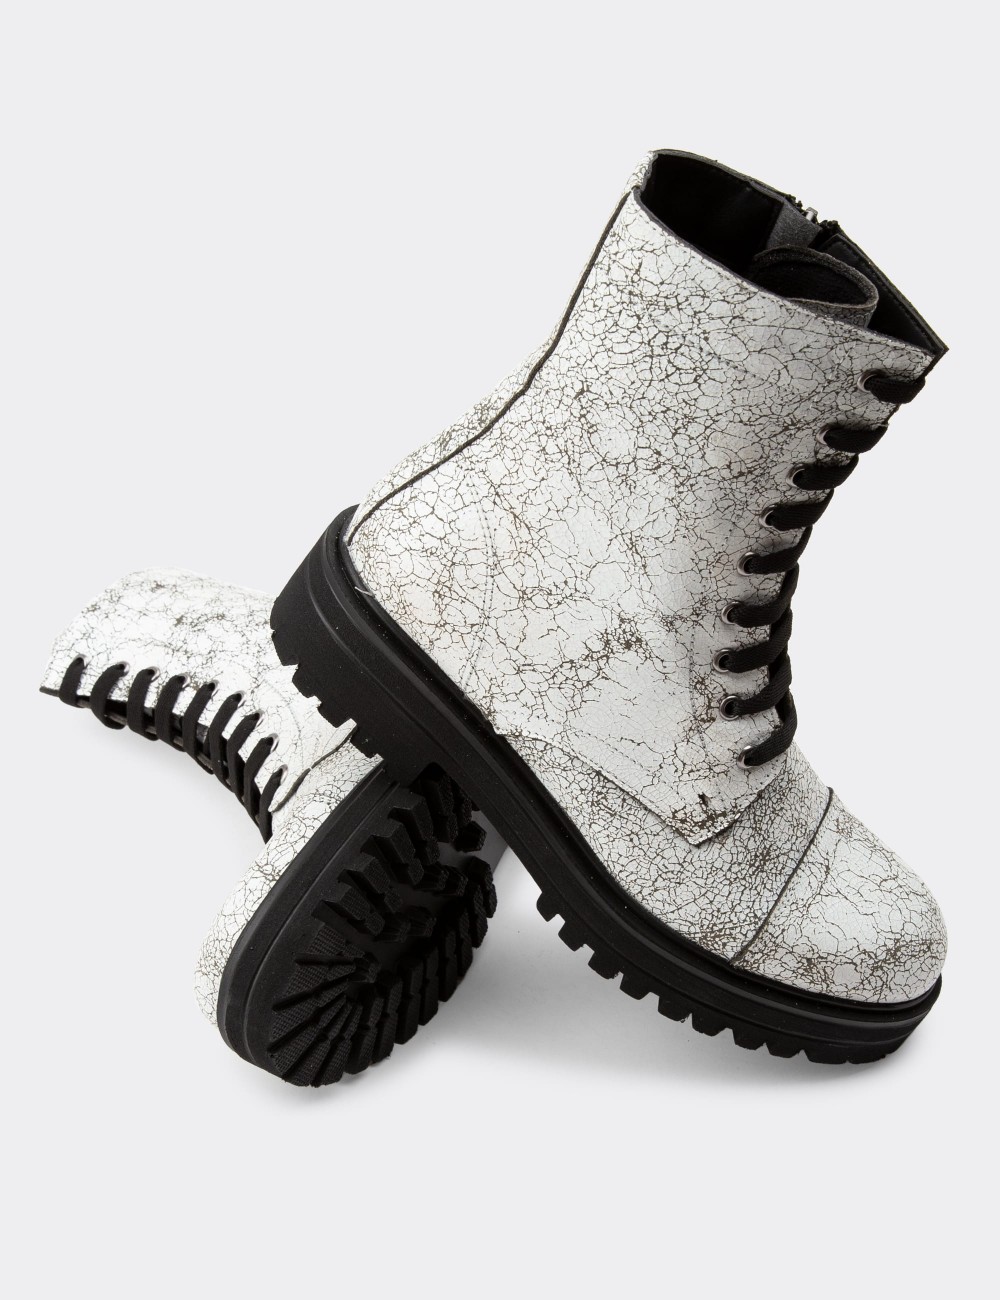 White Leather Vintage Boots - 01802ZBYZE01